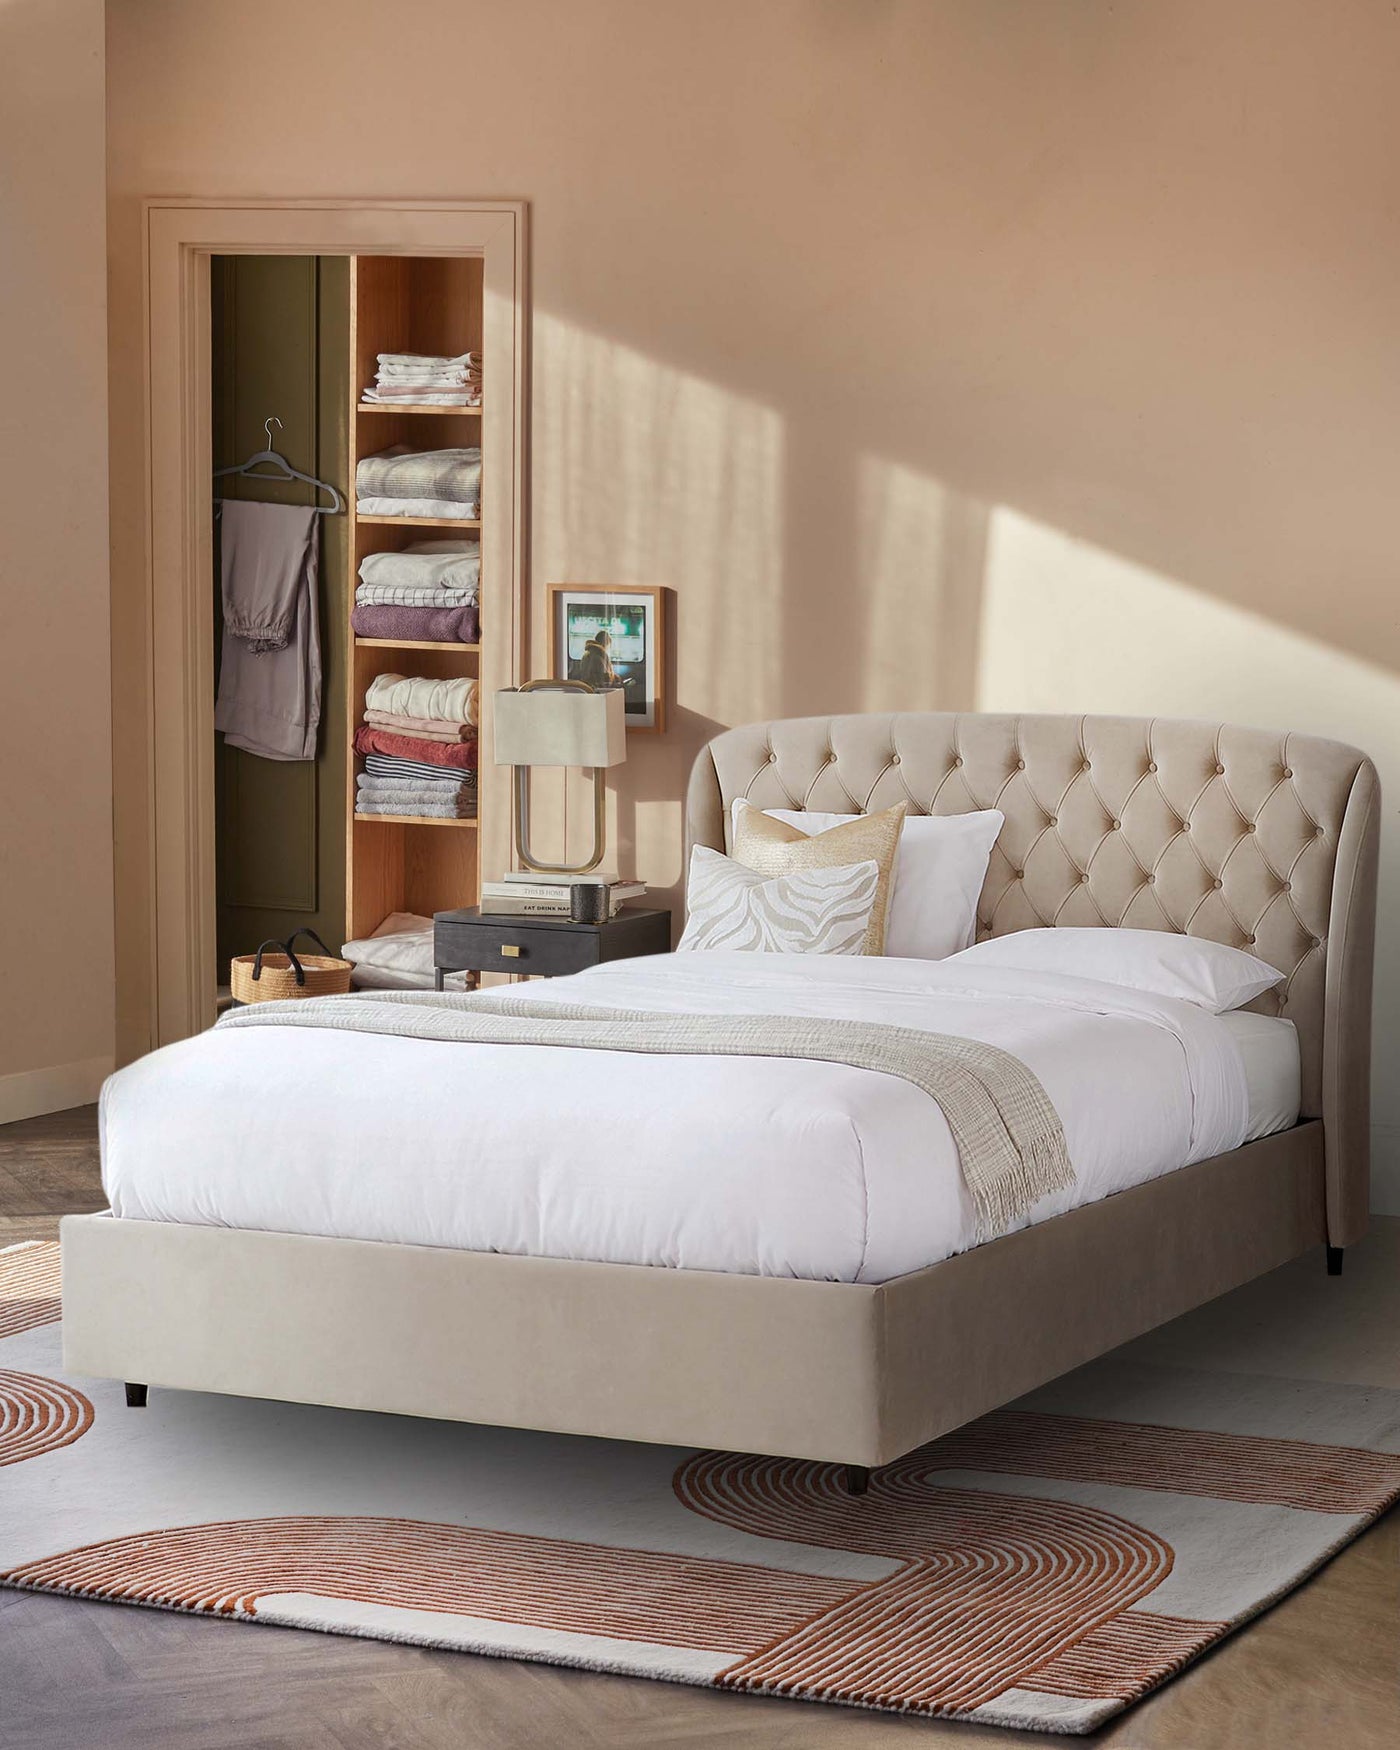 Elegant upholstered bed with tufted headboard in a neutral colour, featuring a low-profile design and clean lines. A stylish table lamp with a rectangular shade and metallic base rests on a stack of books next to the bed. The room is complemented by a contemporary area rug with a geometric pattern in warm tones.